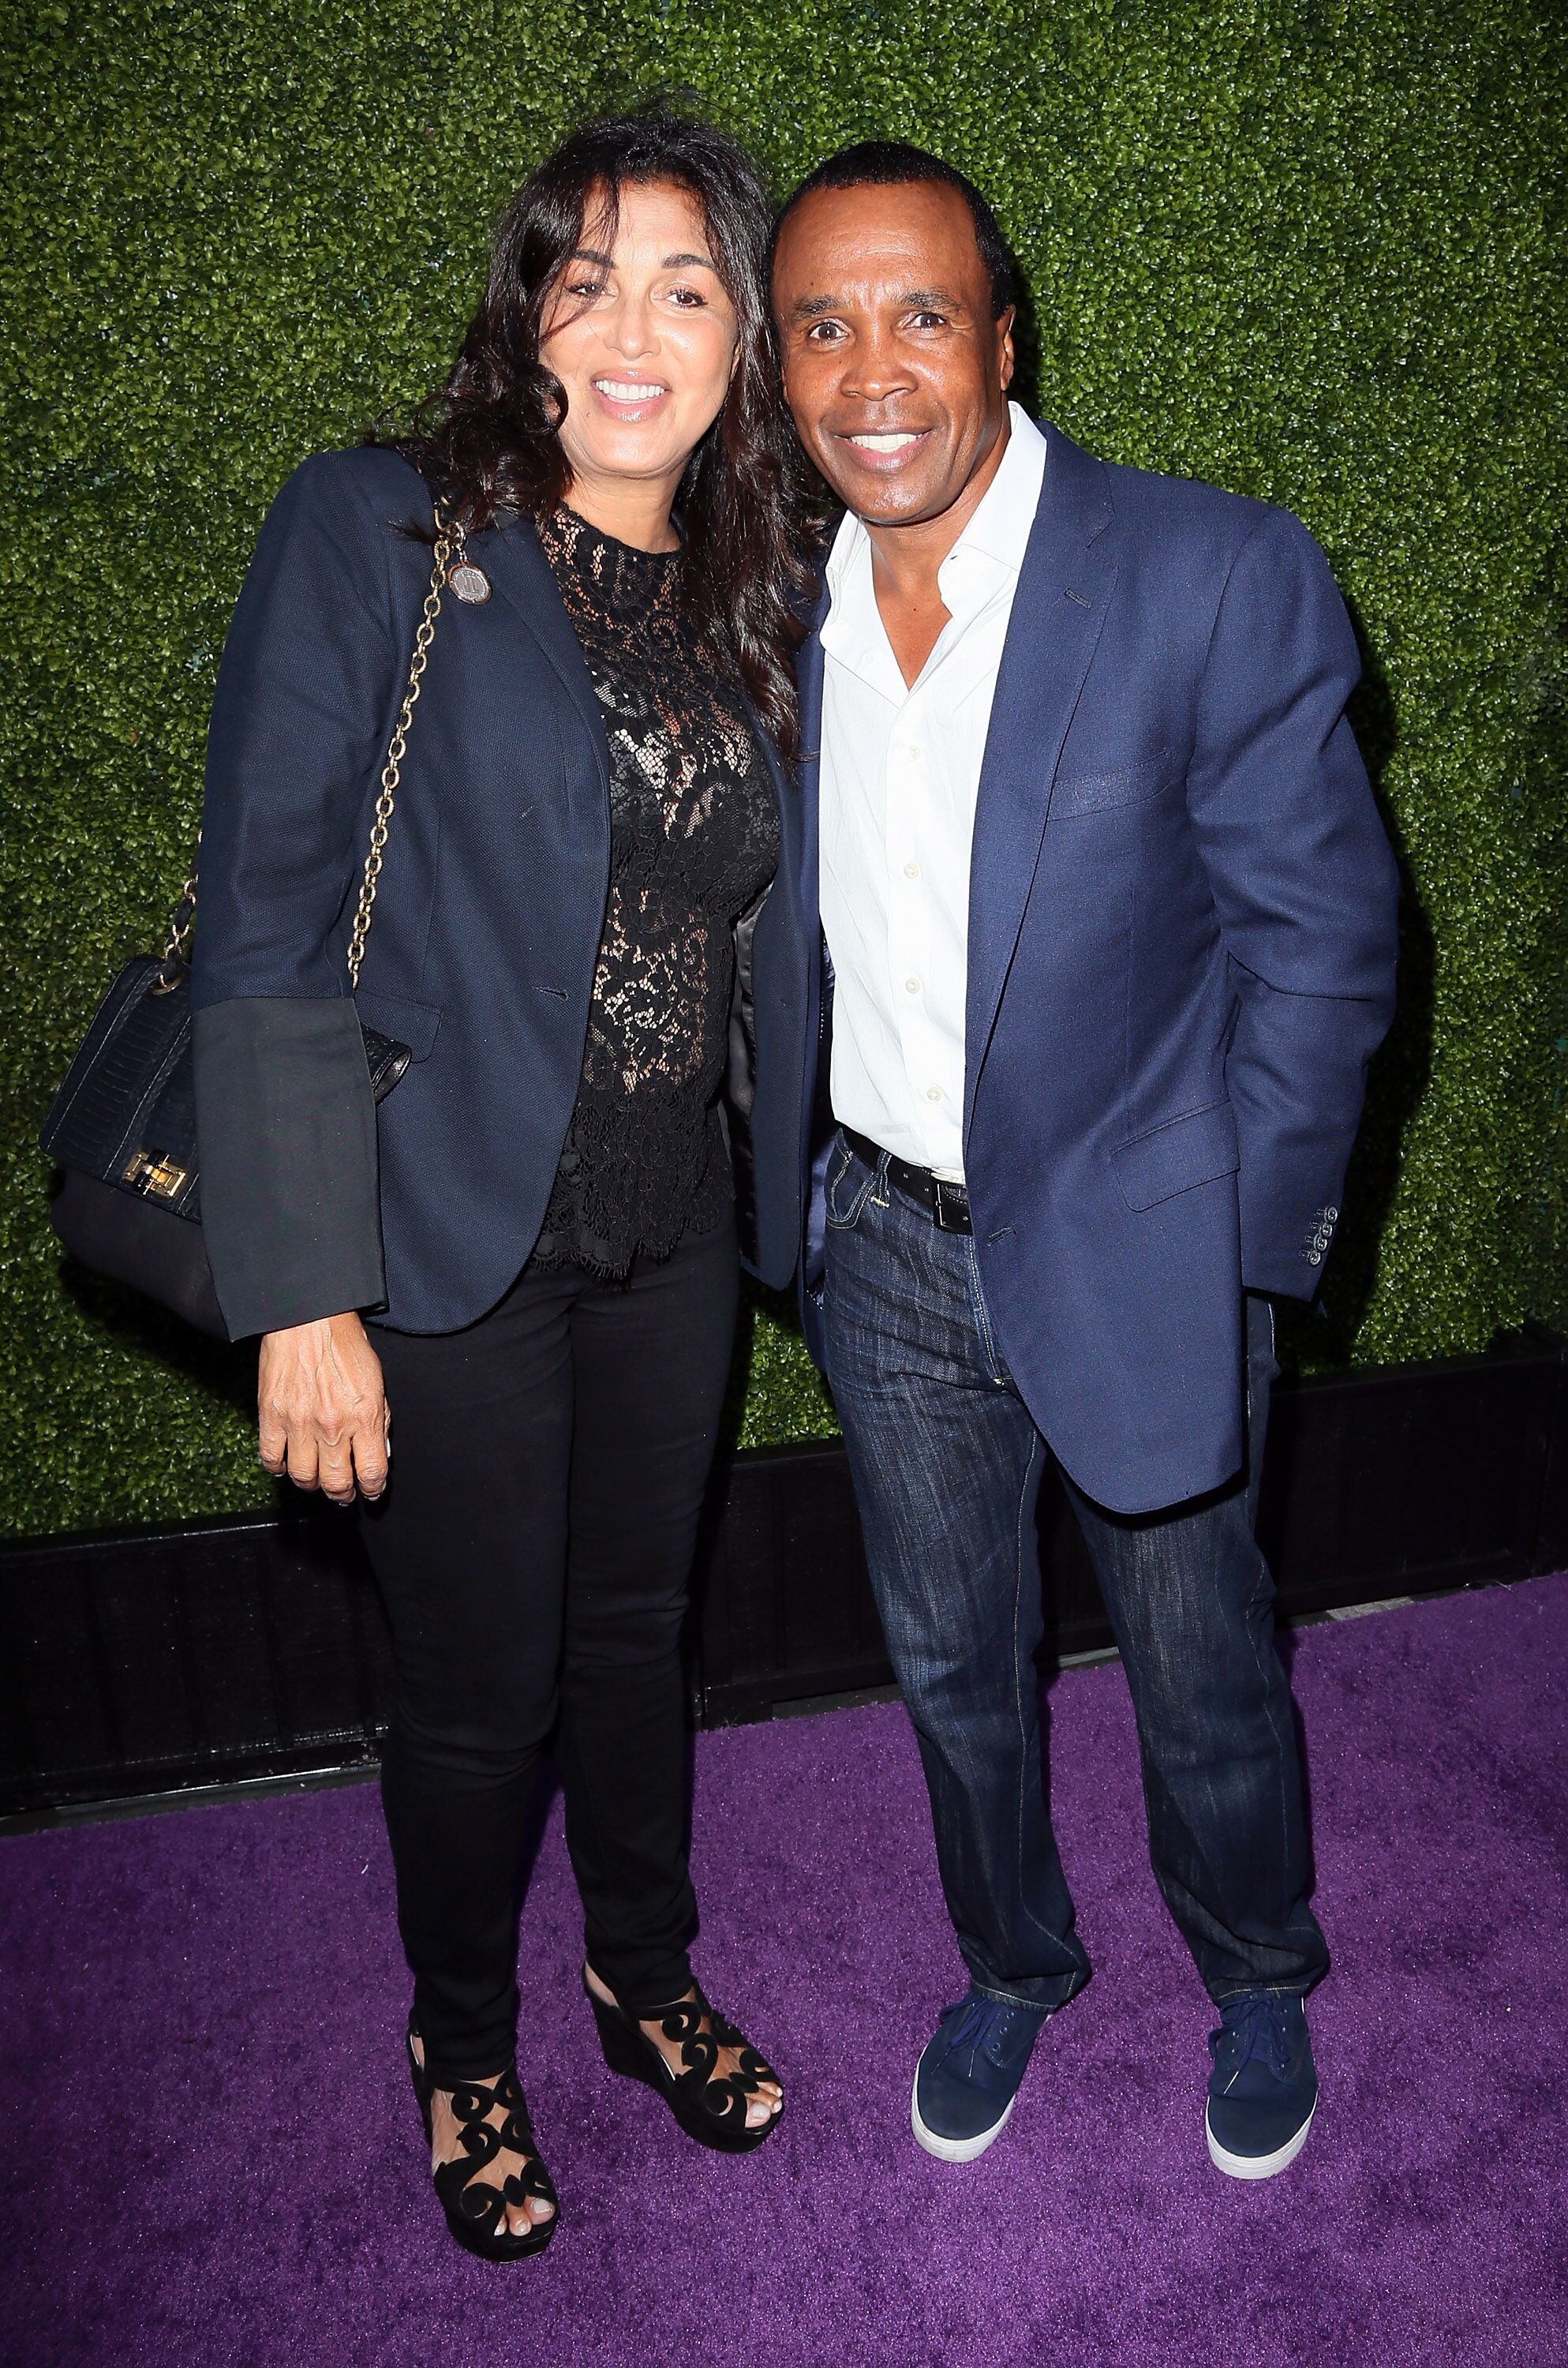 Sugar Ray Leonard and wife Bernadette Robi at the 11th Annual DesignCare Event./ Source: Getty Images